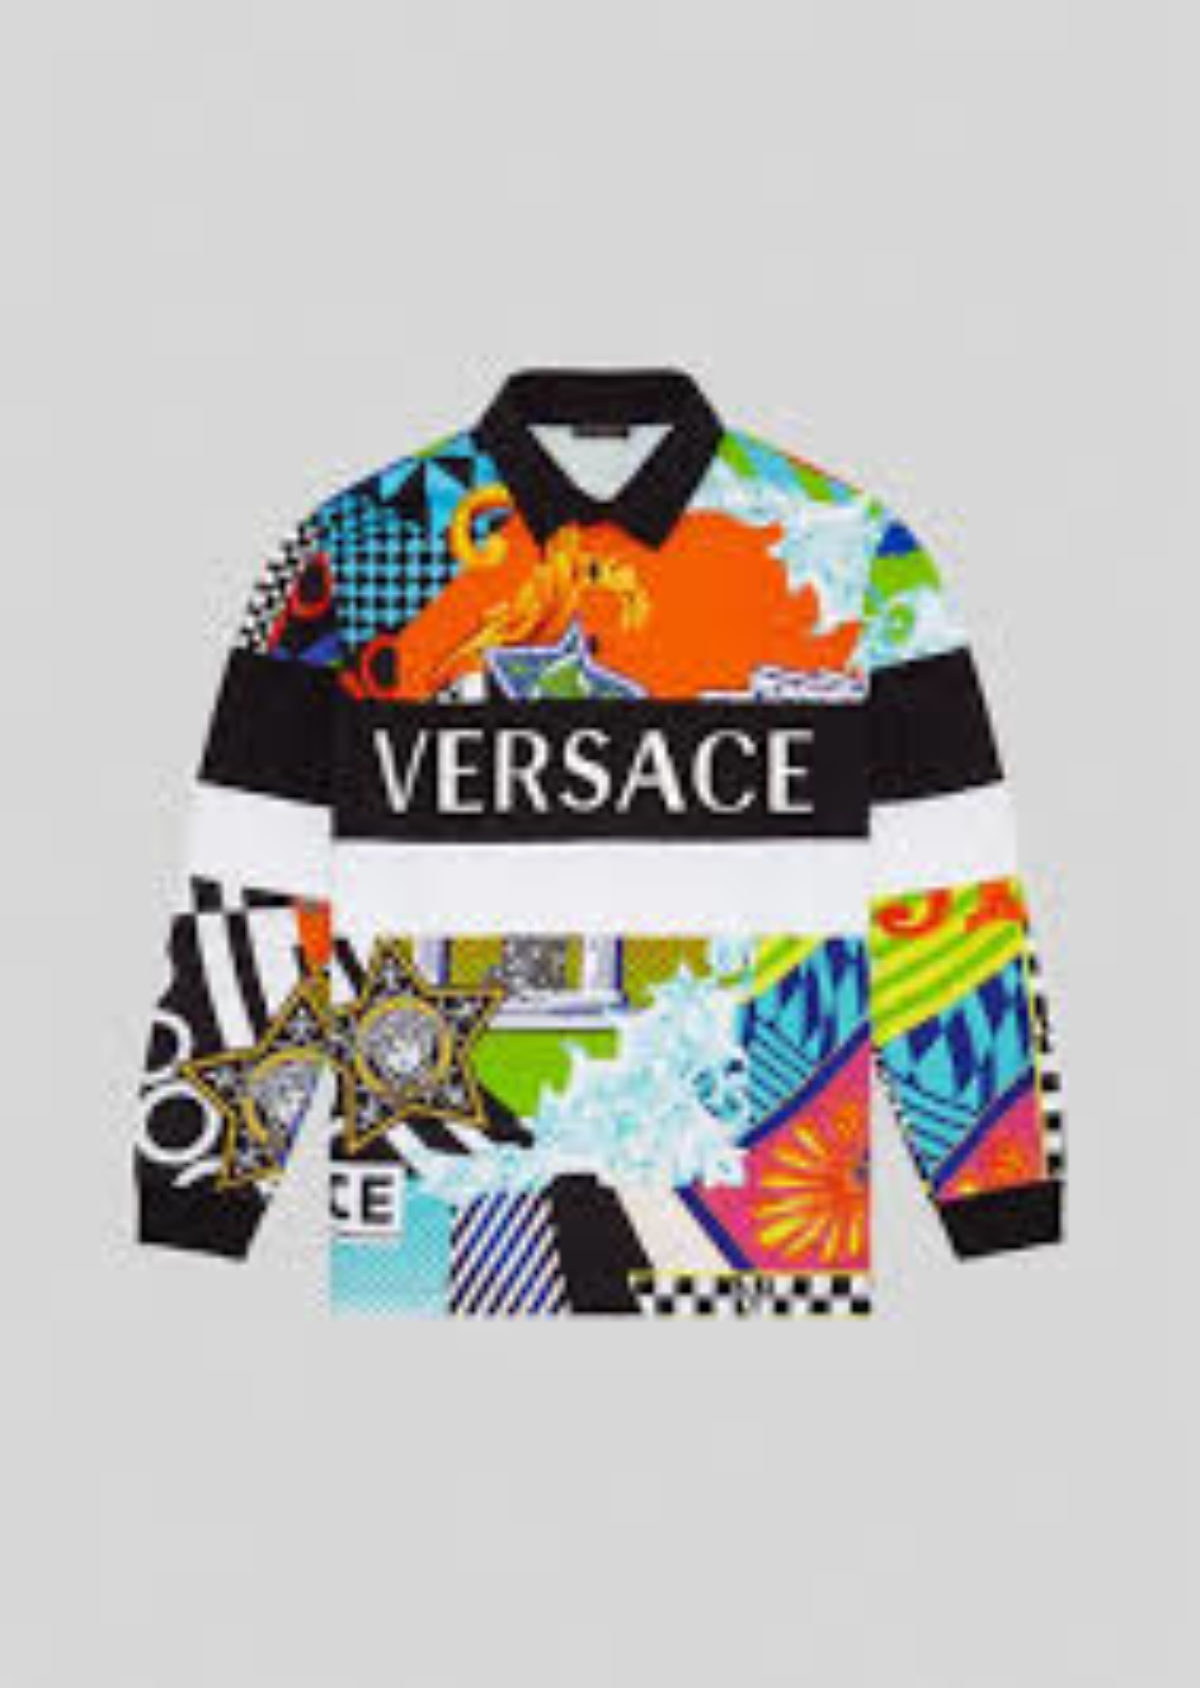 most expensive gucci shirt